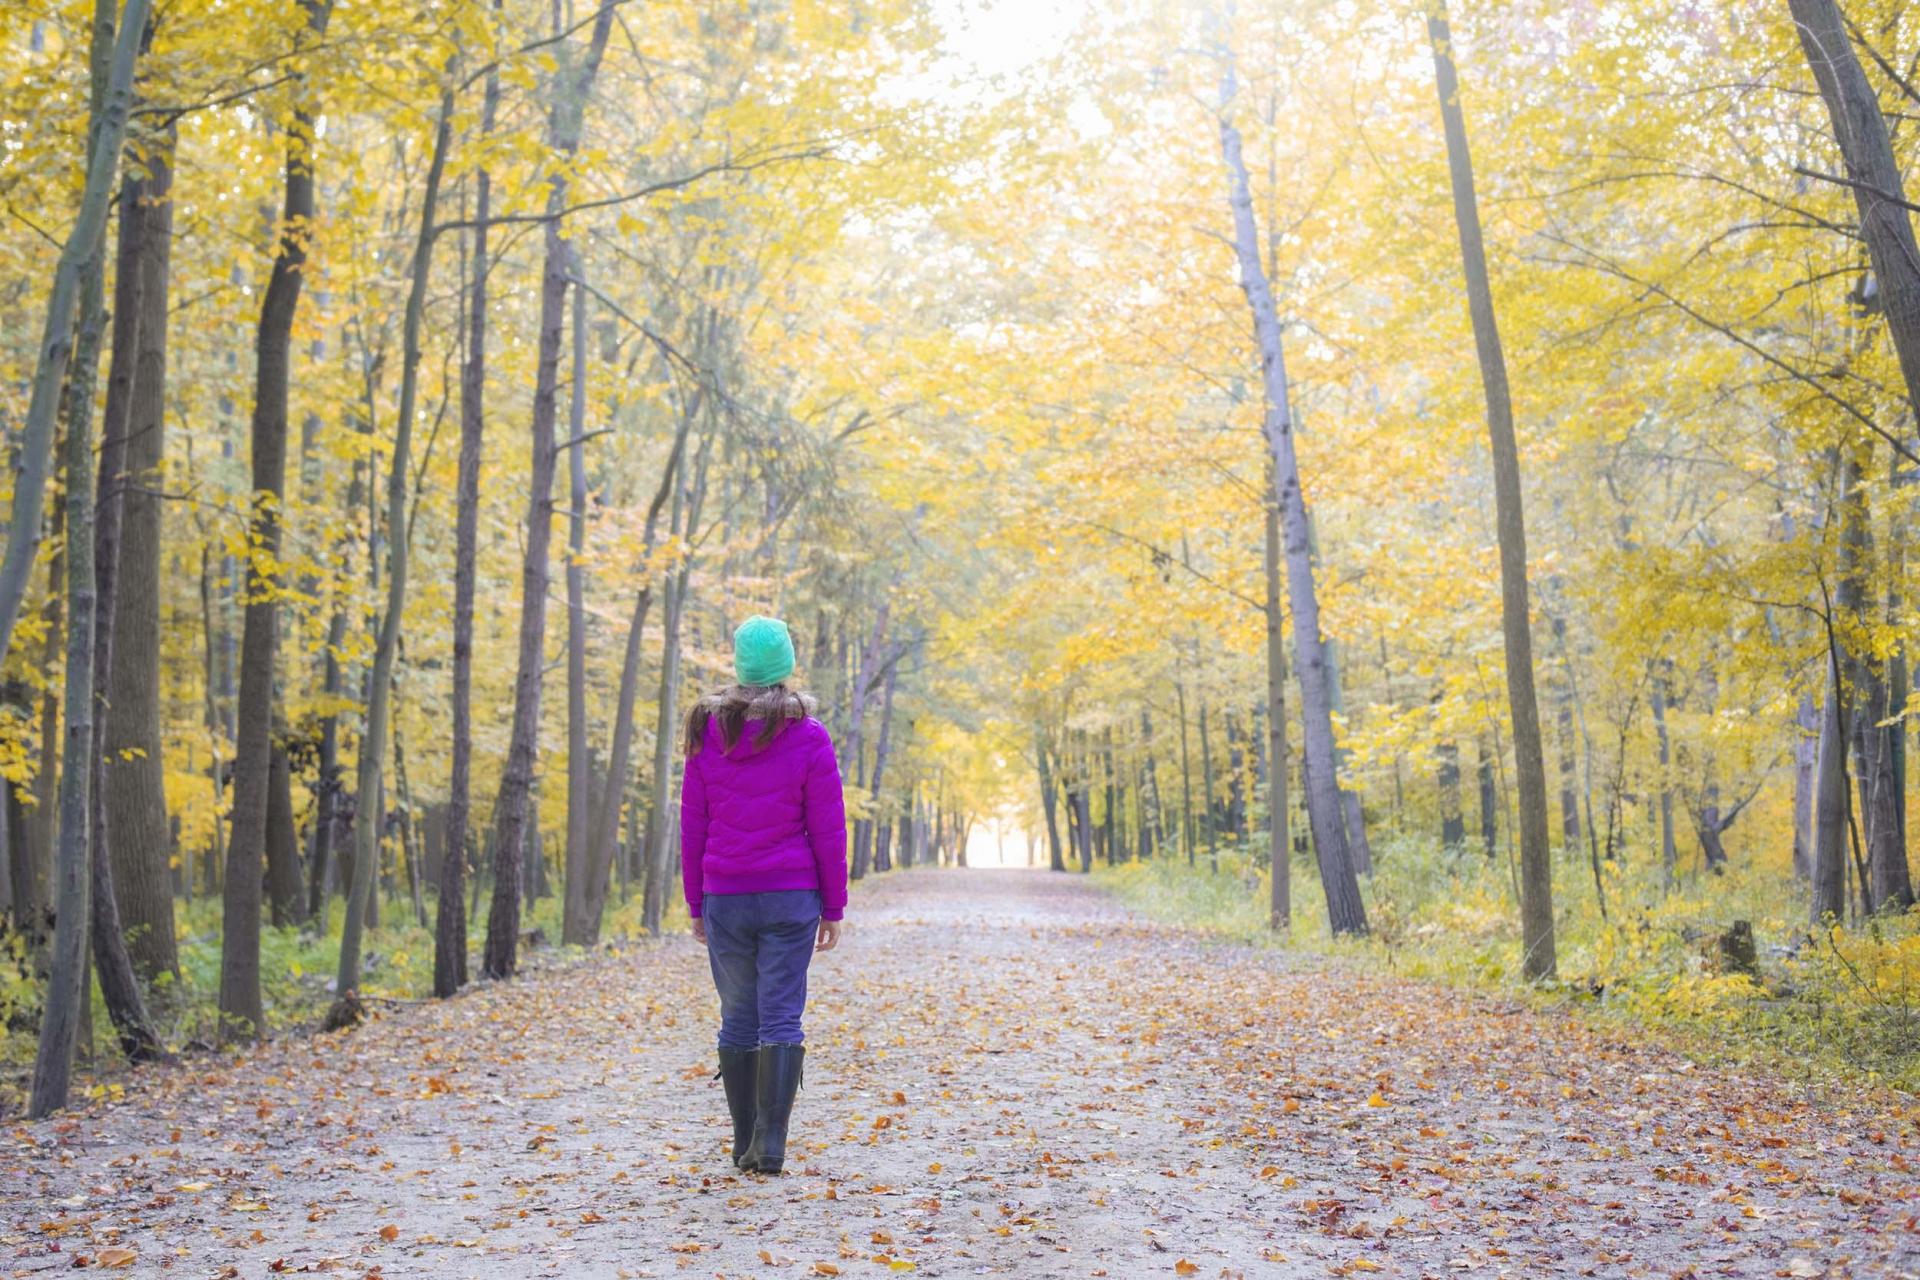 A person walking down a dirt road lined with vibrant fall color.